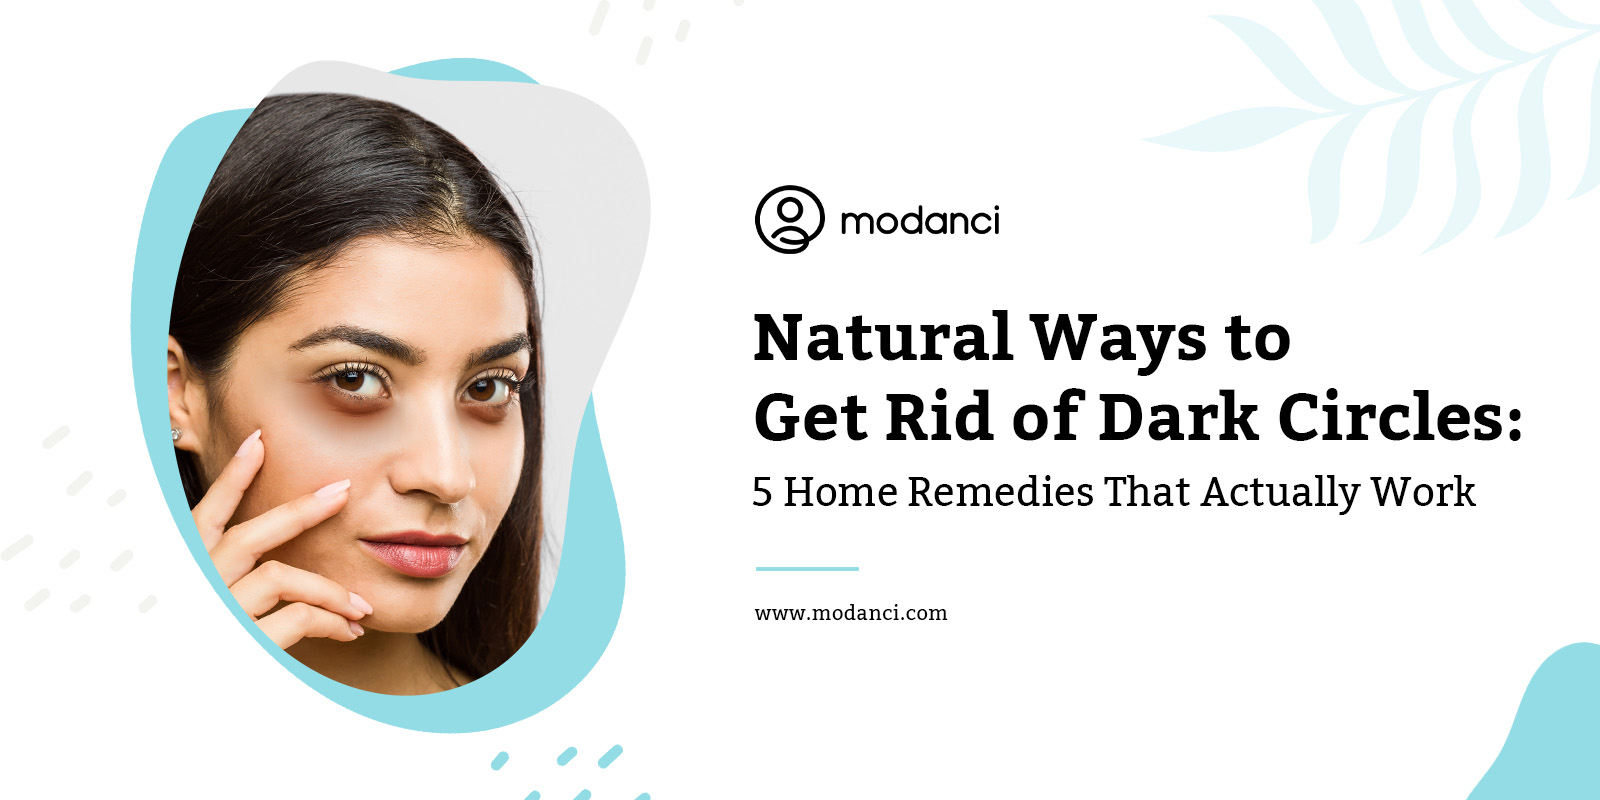 Natural Ways to Get Rid of Dark Circles: 5 Home Remedies That Actually Work